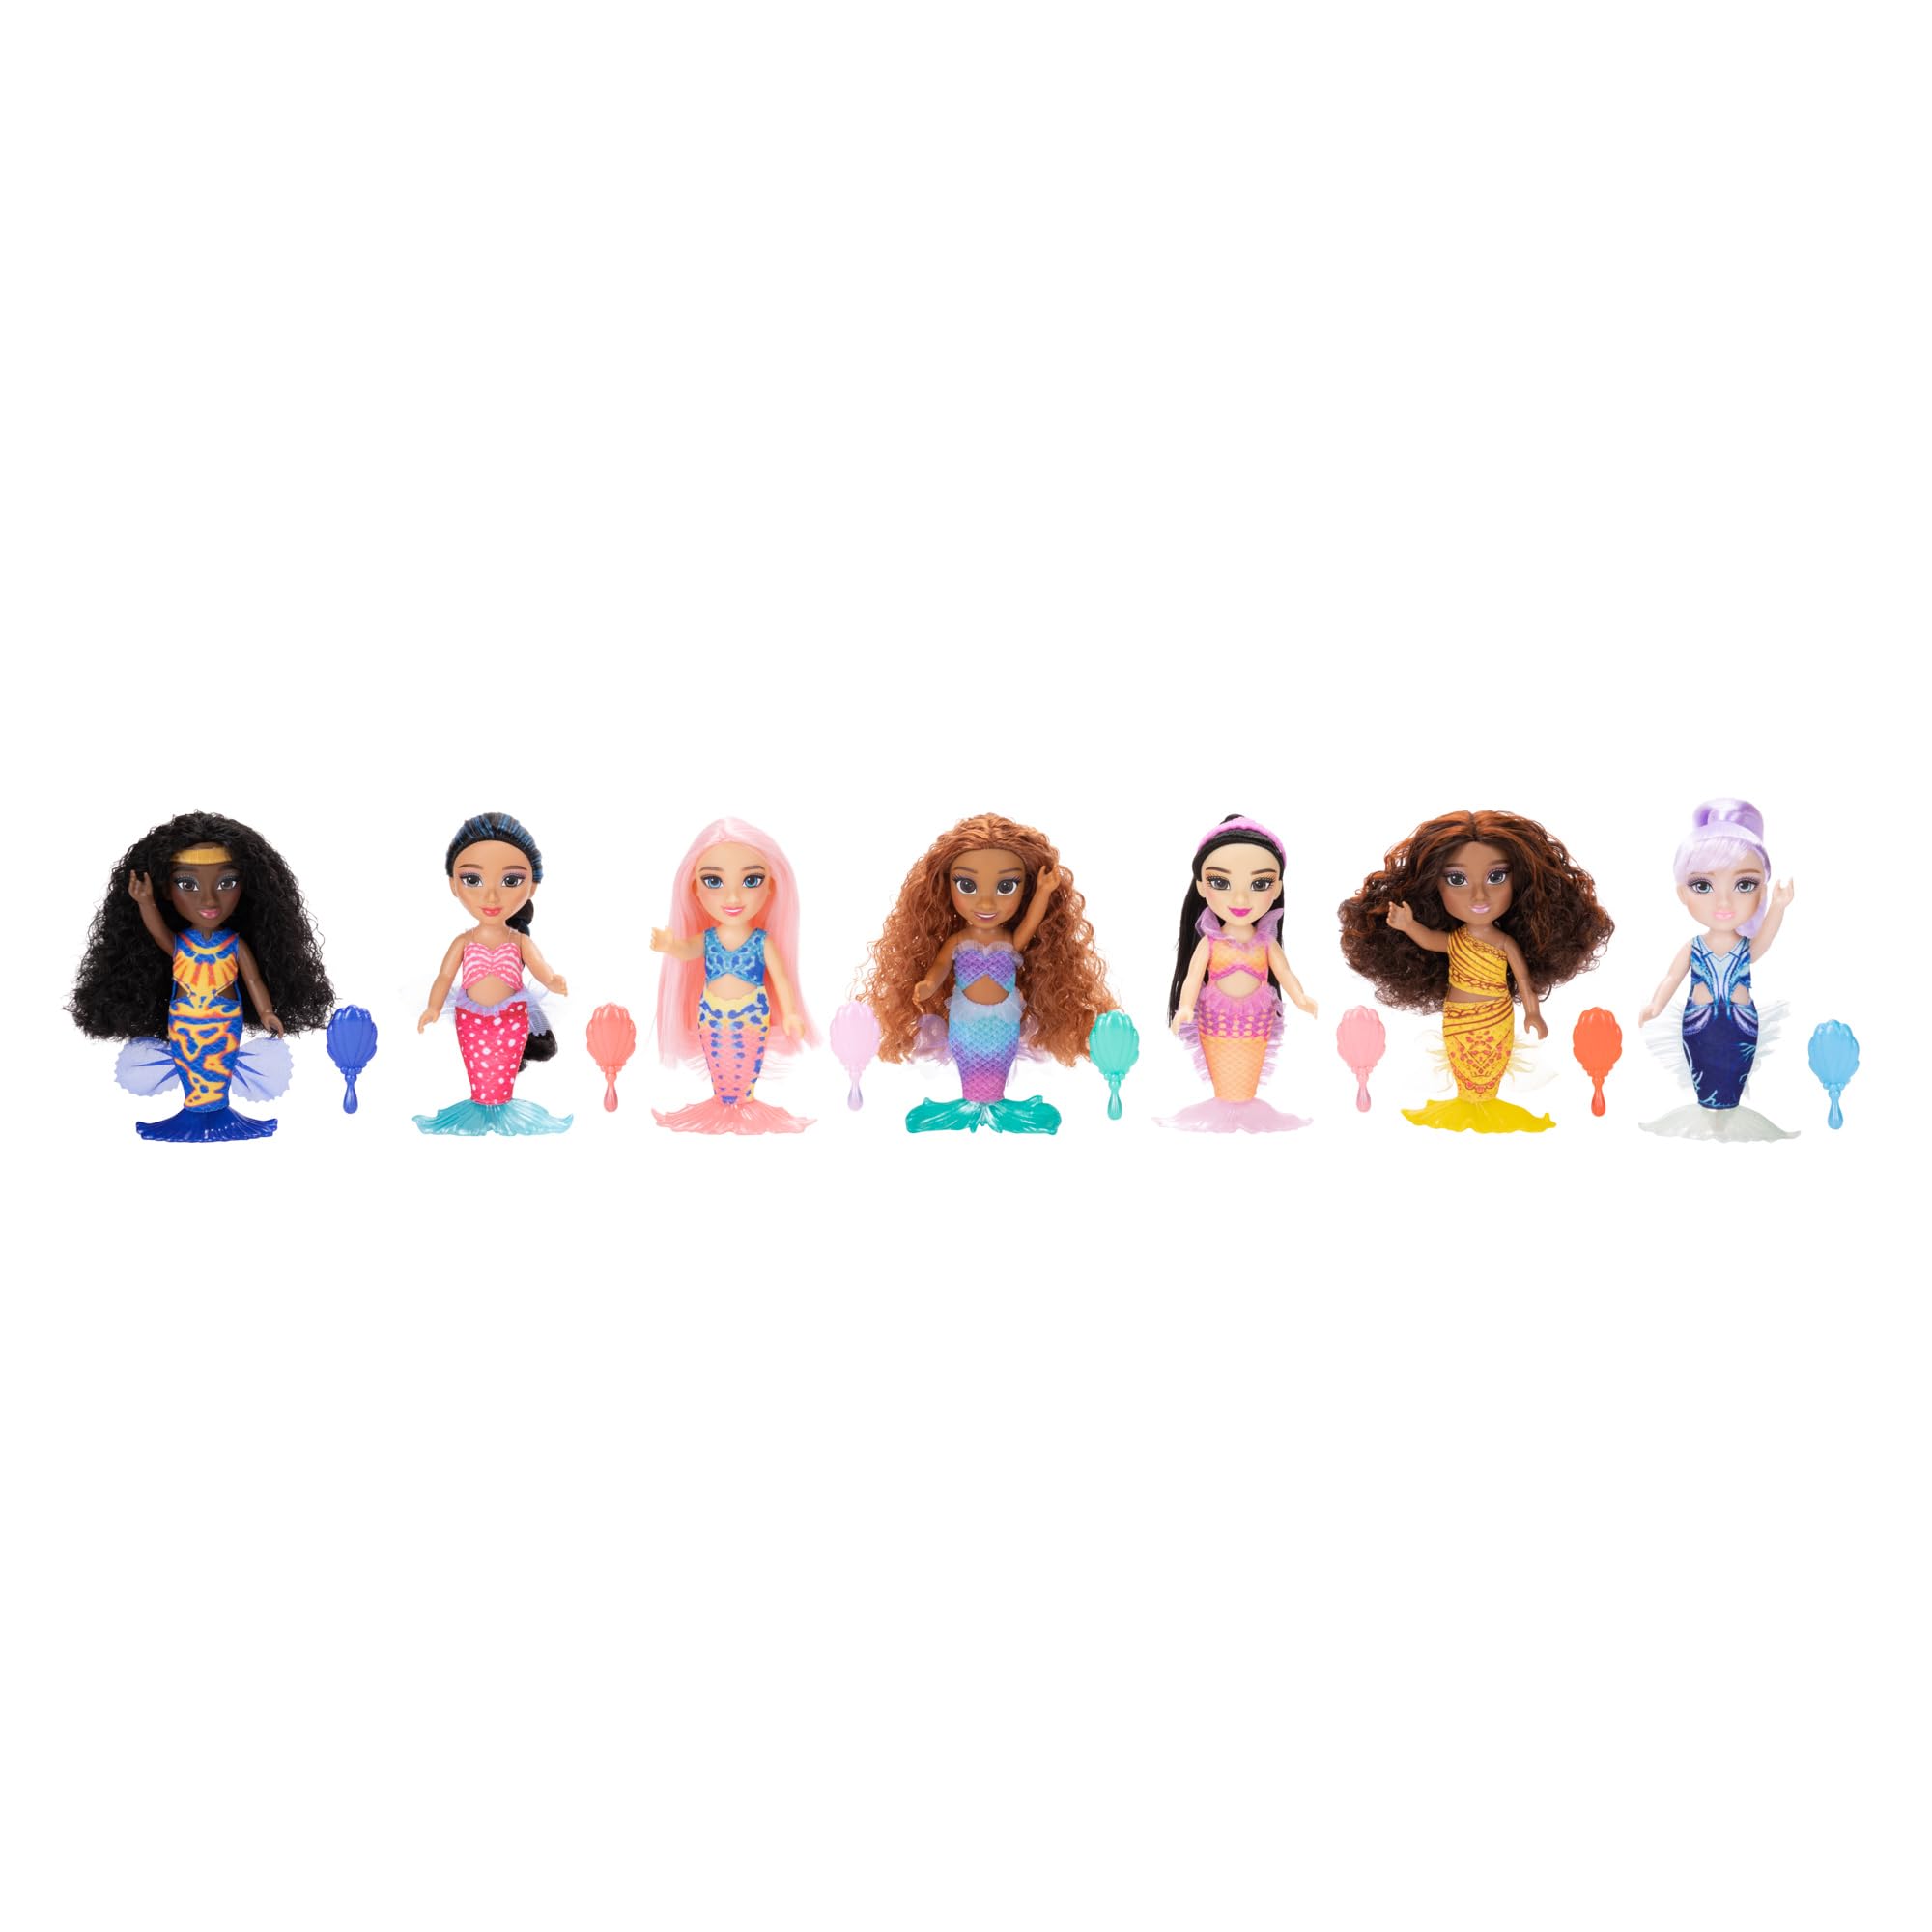 Disney The Little Mermaid Ariel and Sisters Petite Doll Set, Each Dolls Come with a Seashell Brush